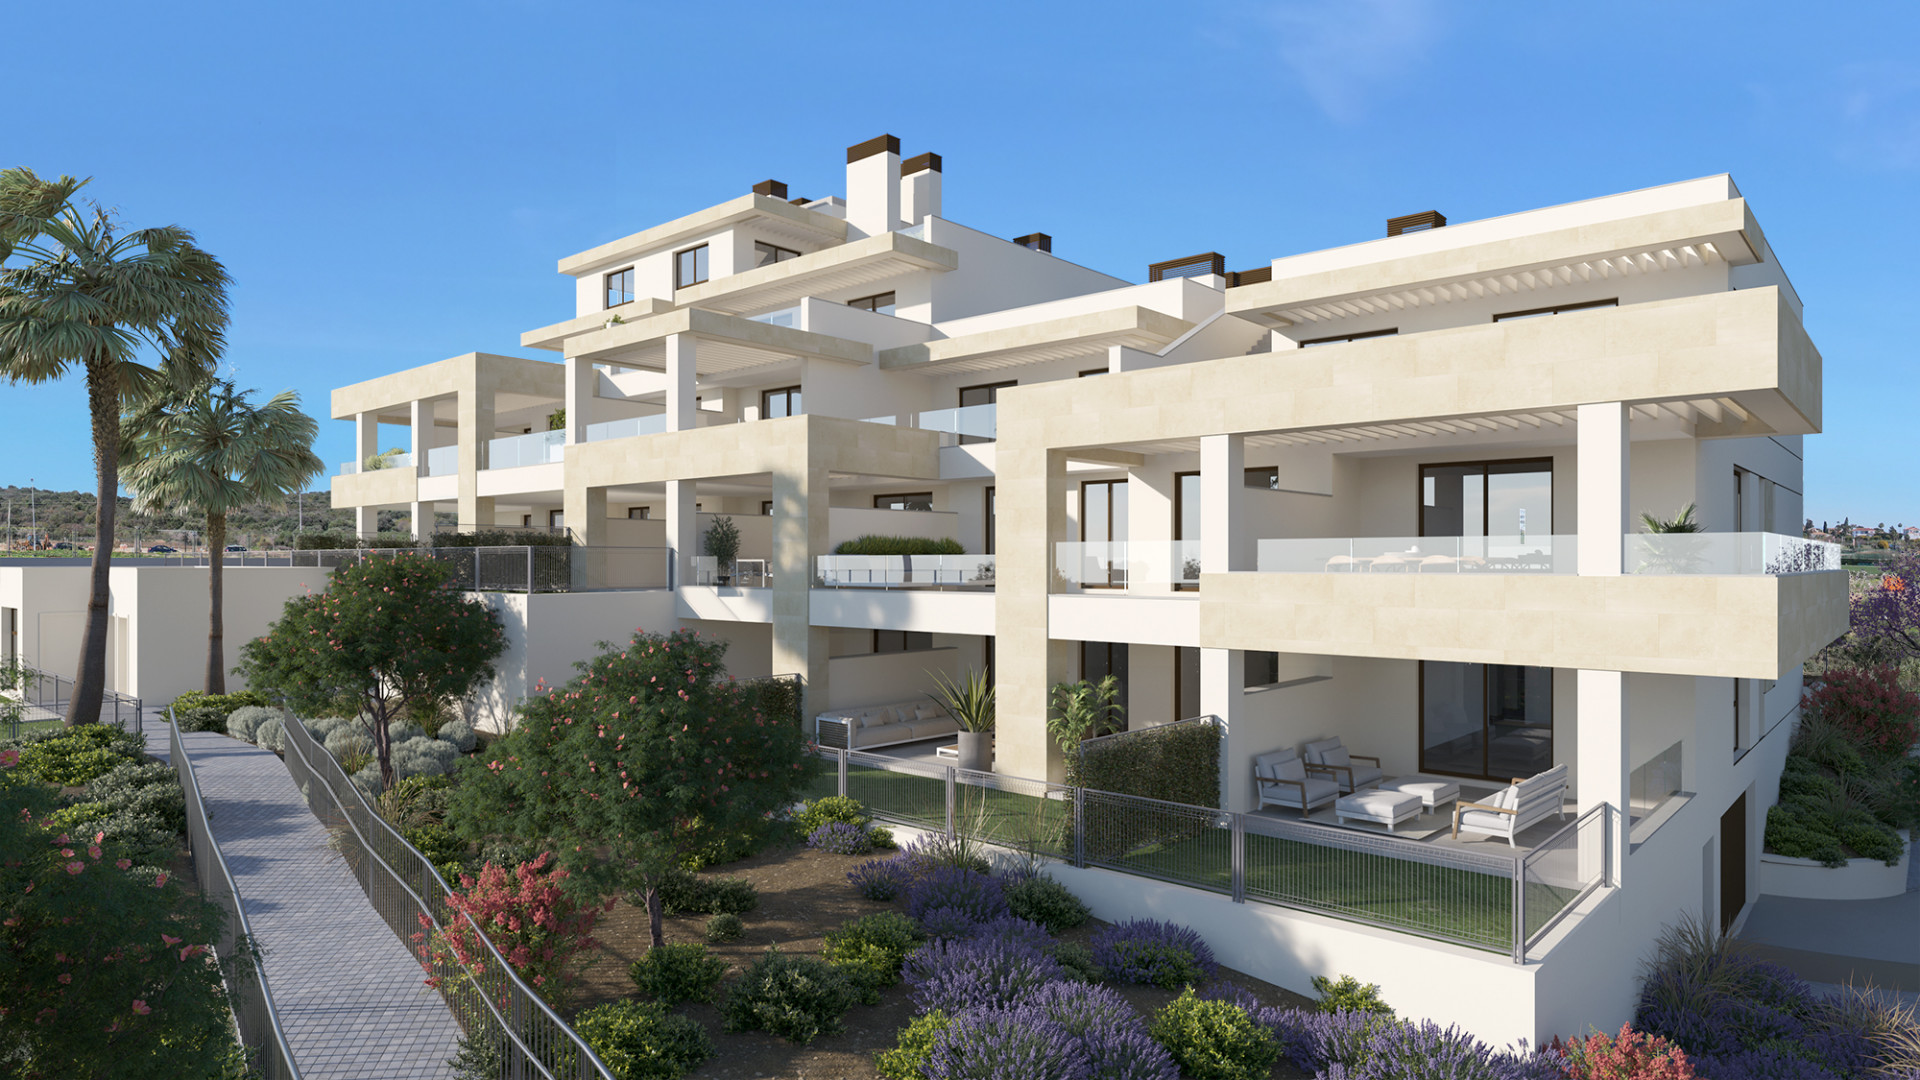 Bayside Homes: New residential complex of 41 homes located in Estepona.